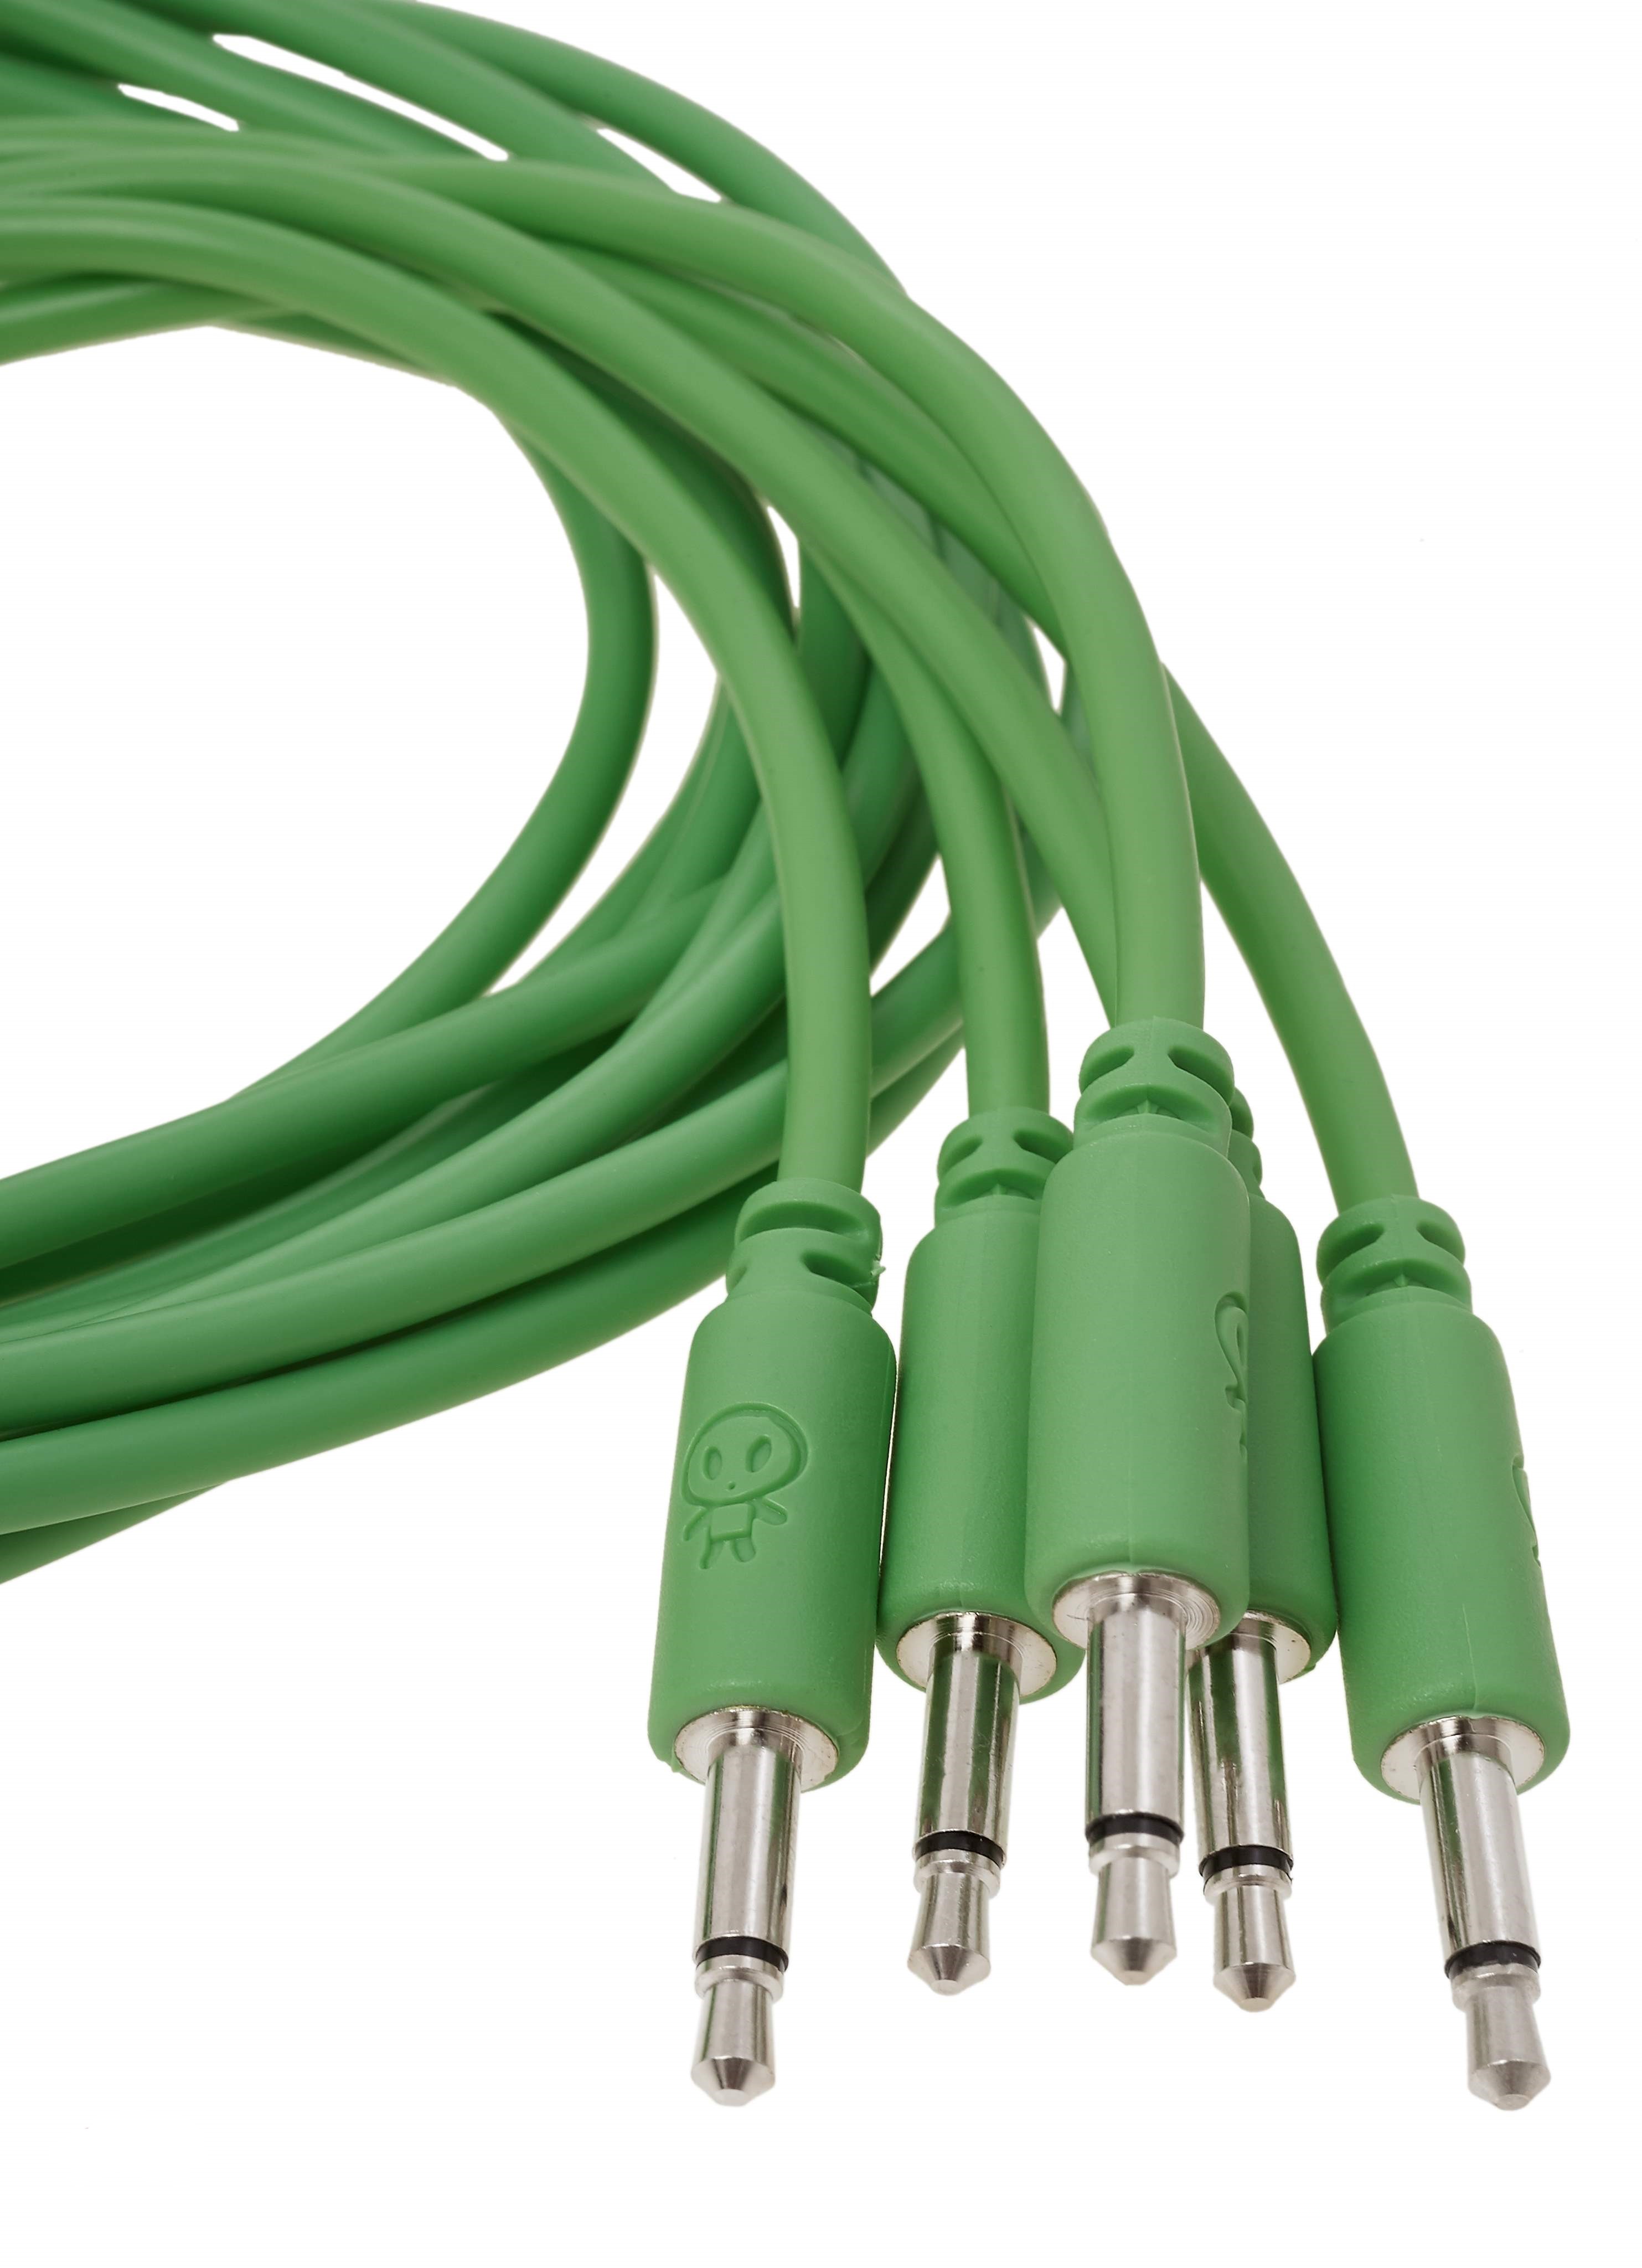 Erica Synths Eurorack Patch Cables 20cm, 5 Pcs Green по цене 870 ₽